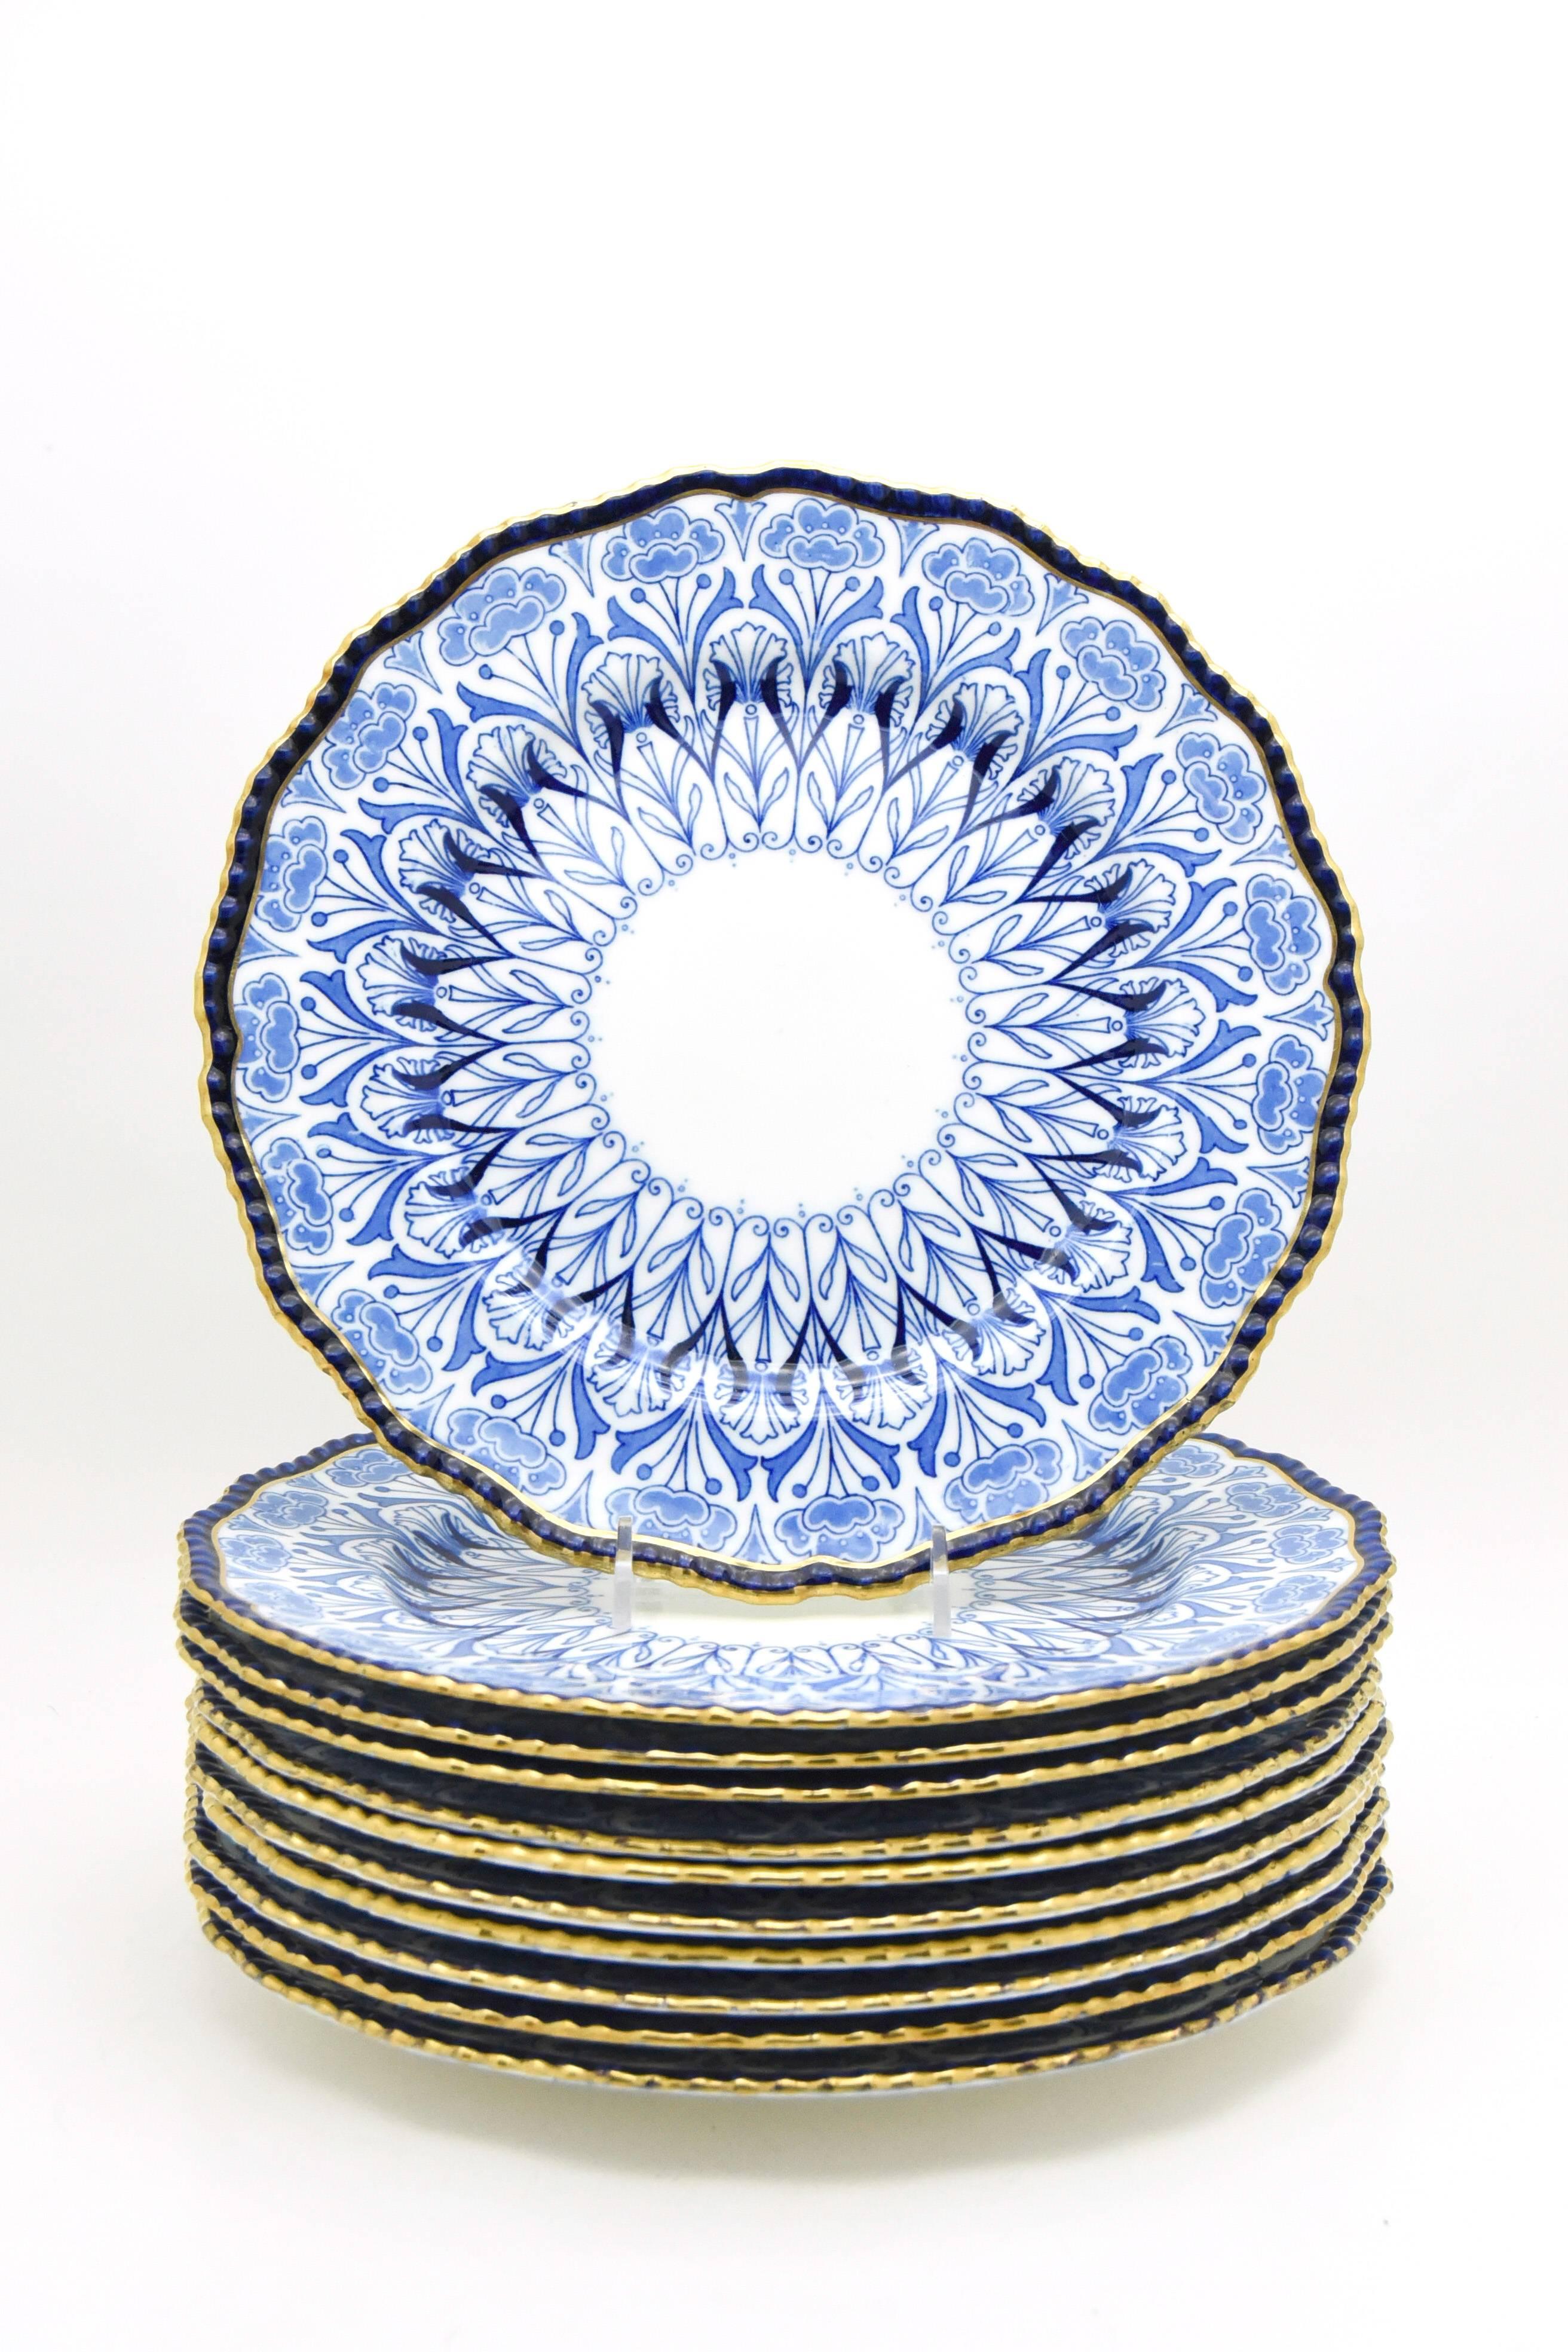 This set of 11 dinner plates, made by Doulton Burslem, exemplify the overlapping decorative styles of the Aesthetic Movement and the Arts and Crafts Movement. They exhibit all the qualities of blue and white Japonesque transfer decoration combined